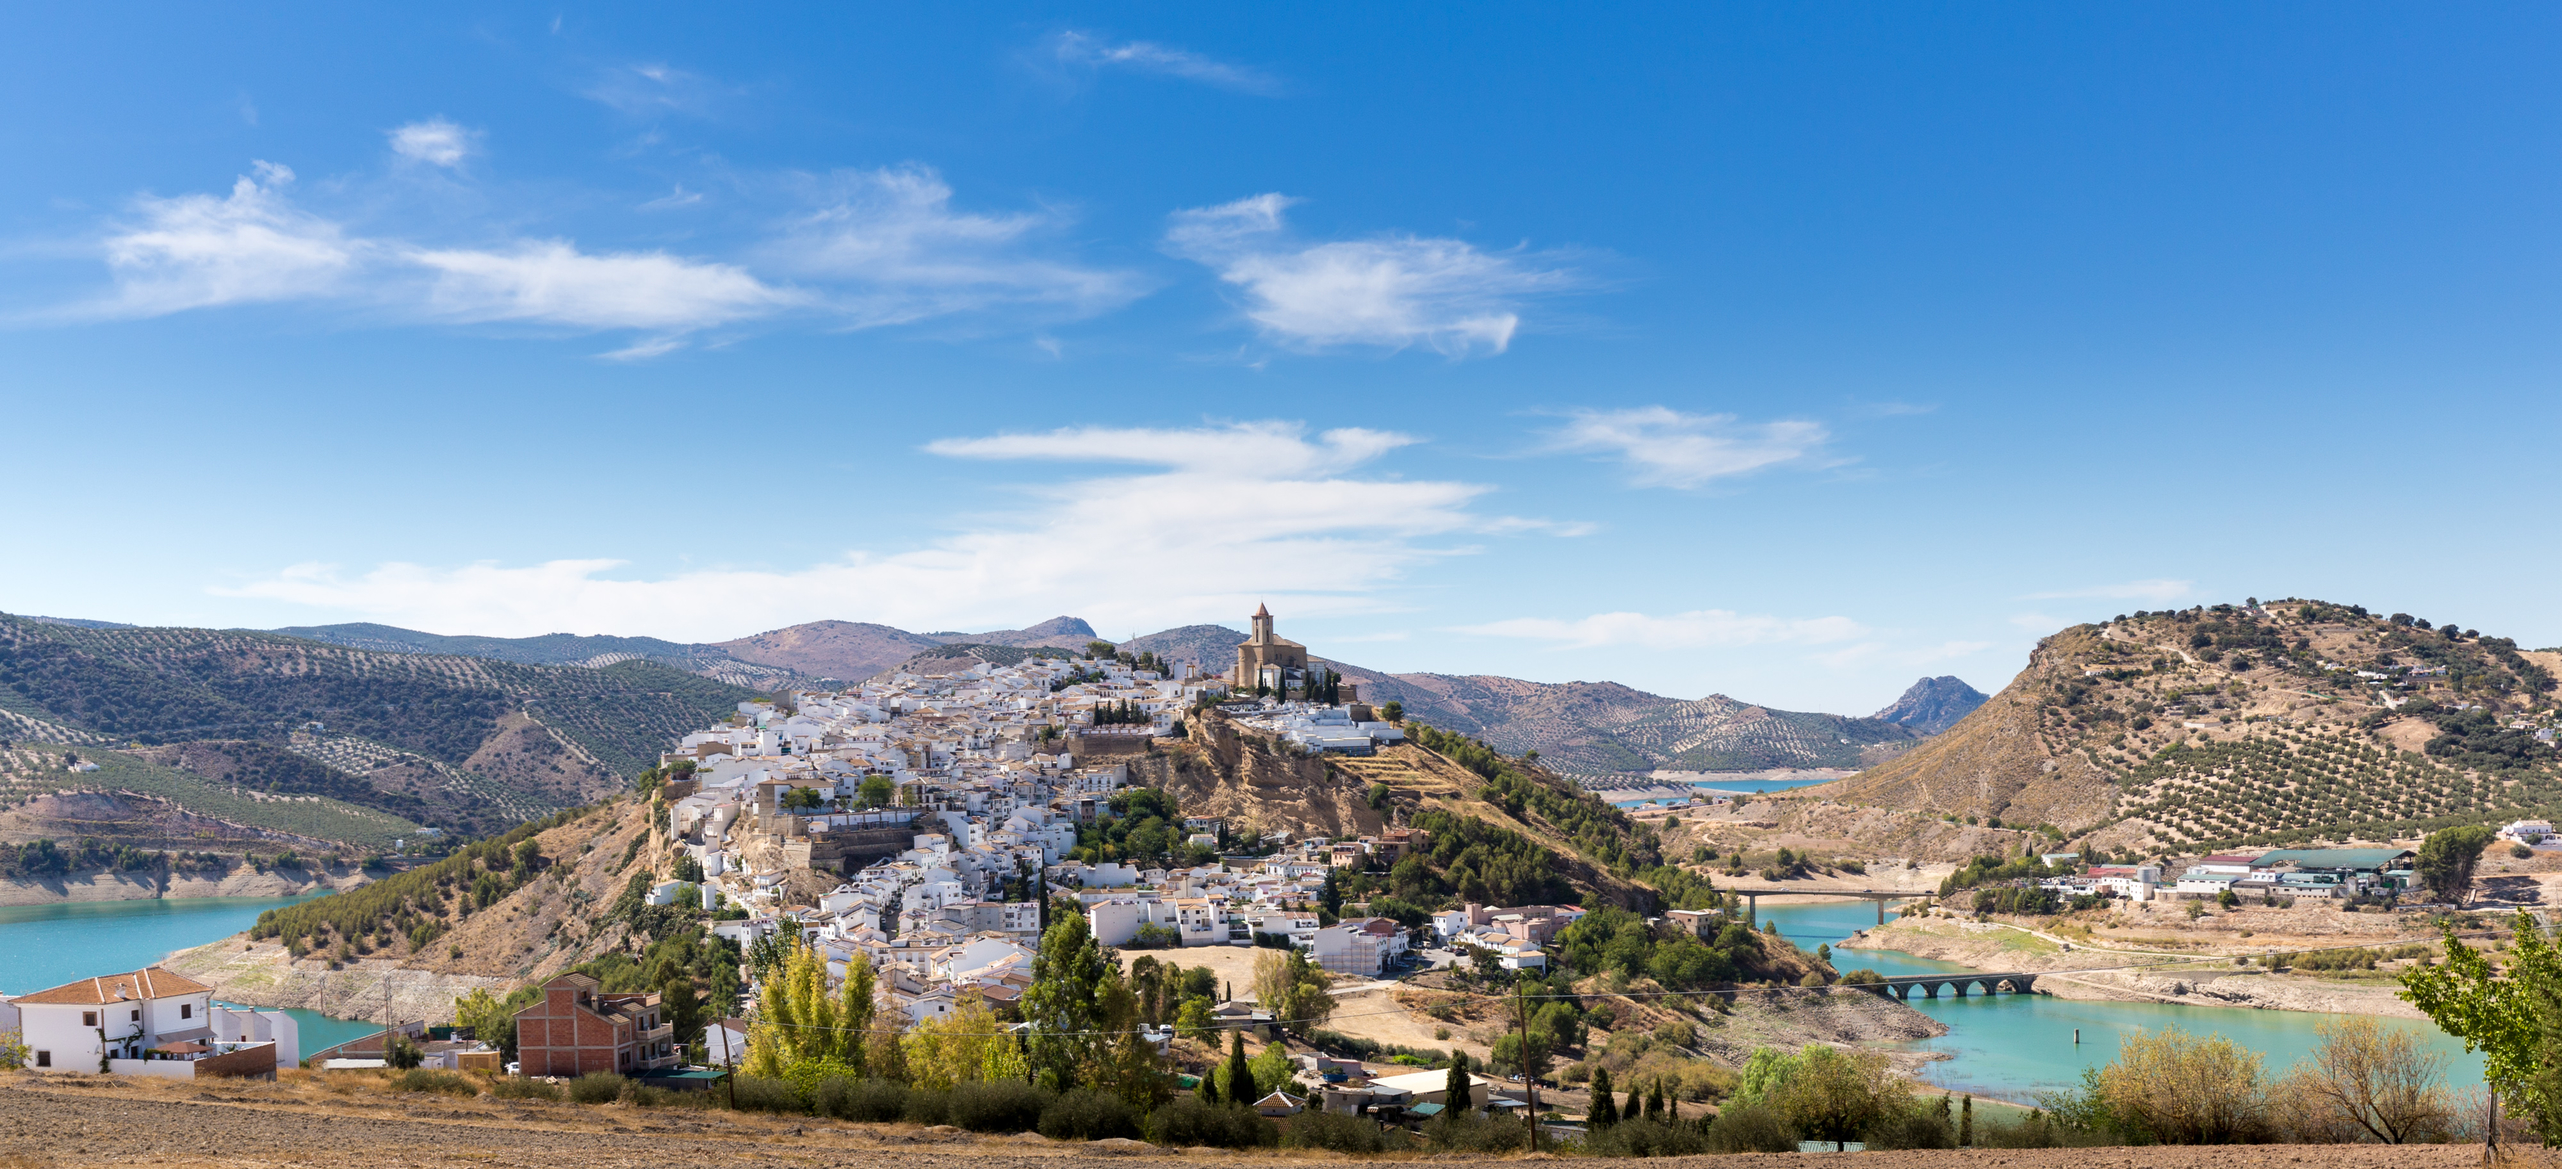 8-night Andalucia travel package with airfare, hotel and rental car from $813